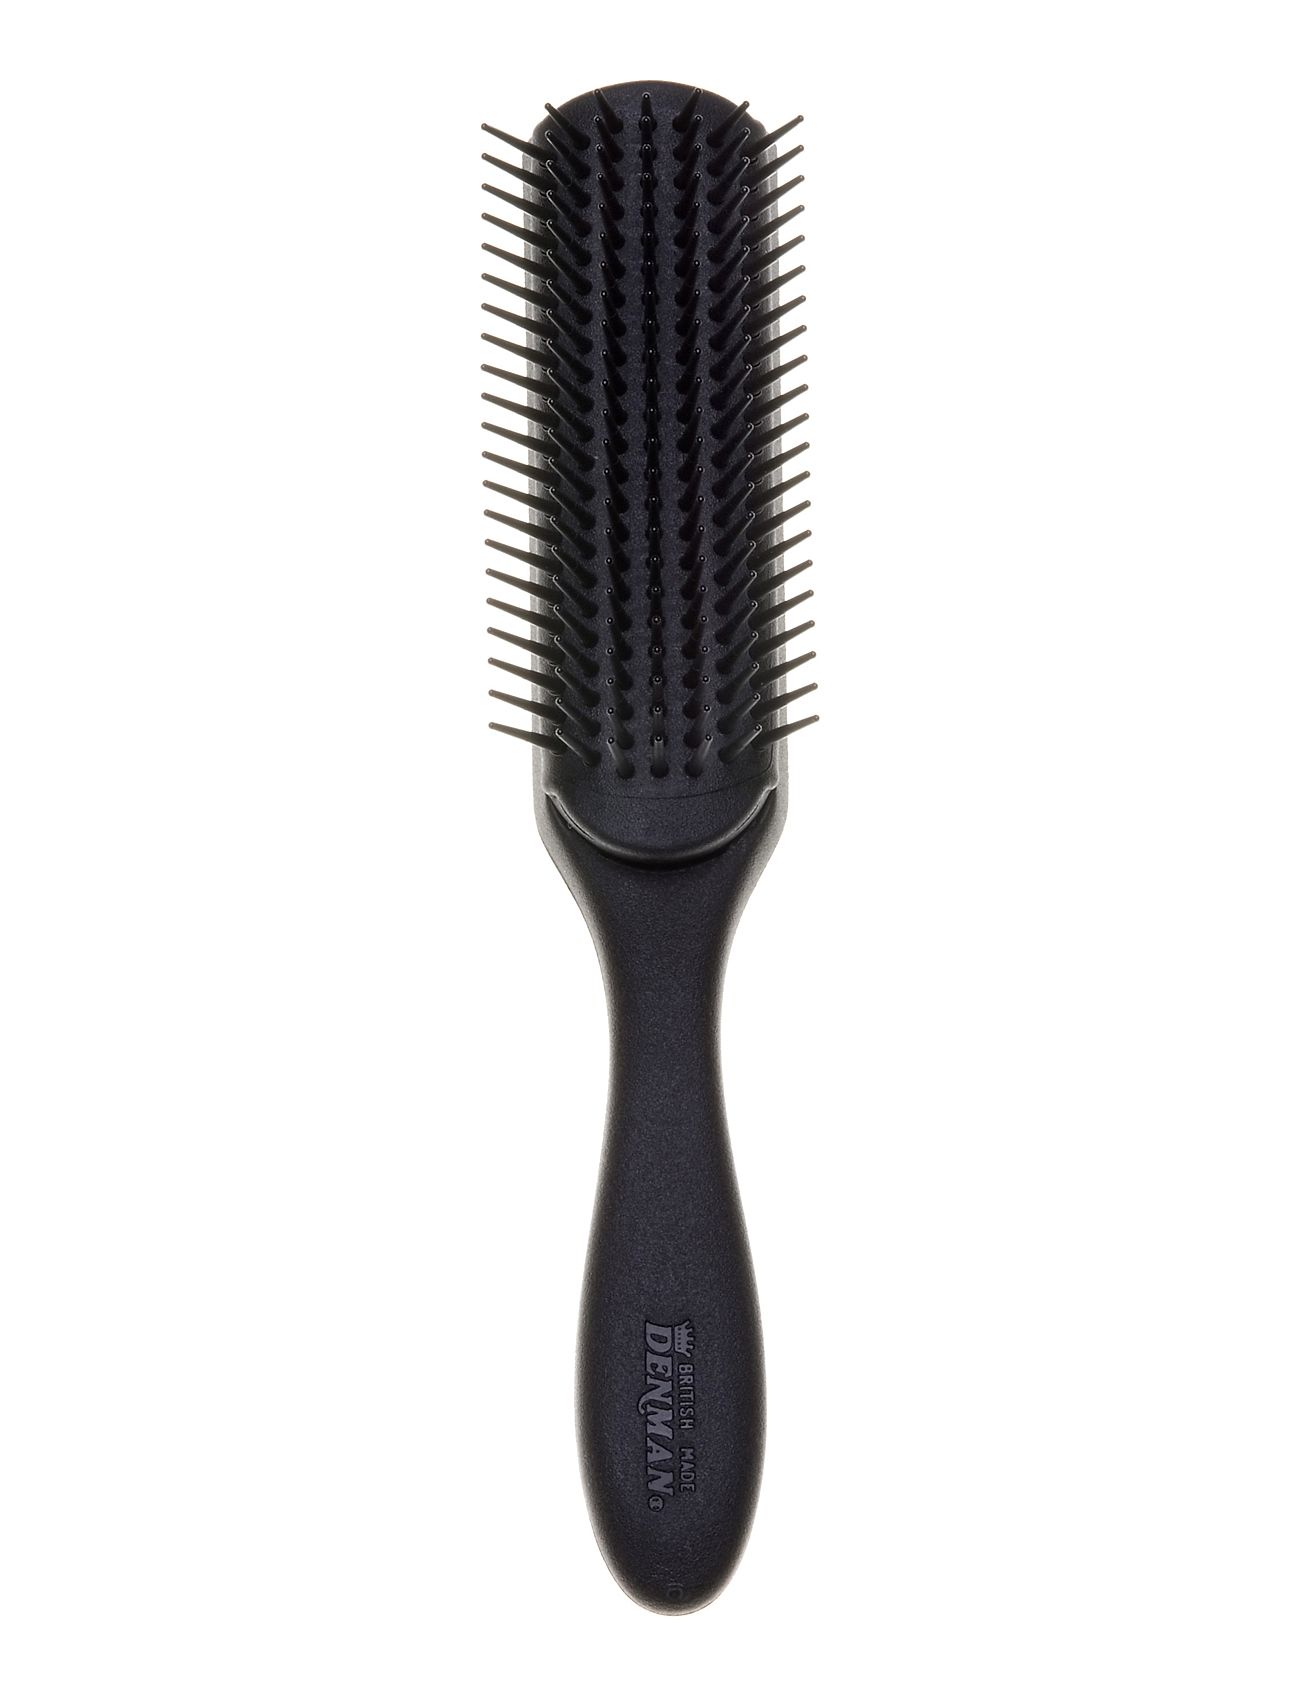 Denman Jack Dean D3 Styling Brush Beauty Men Hair Styling Combs And Brushes Black Denman